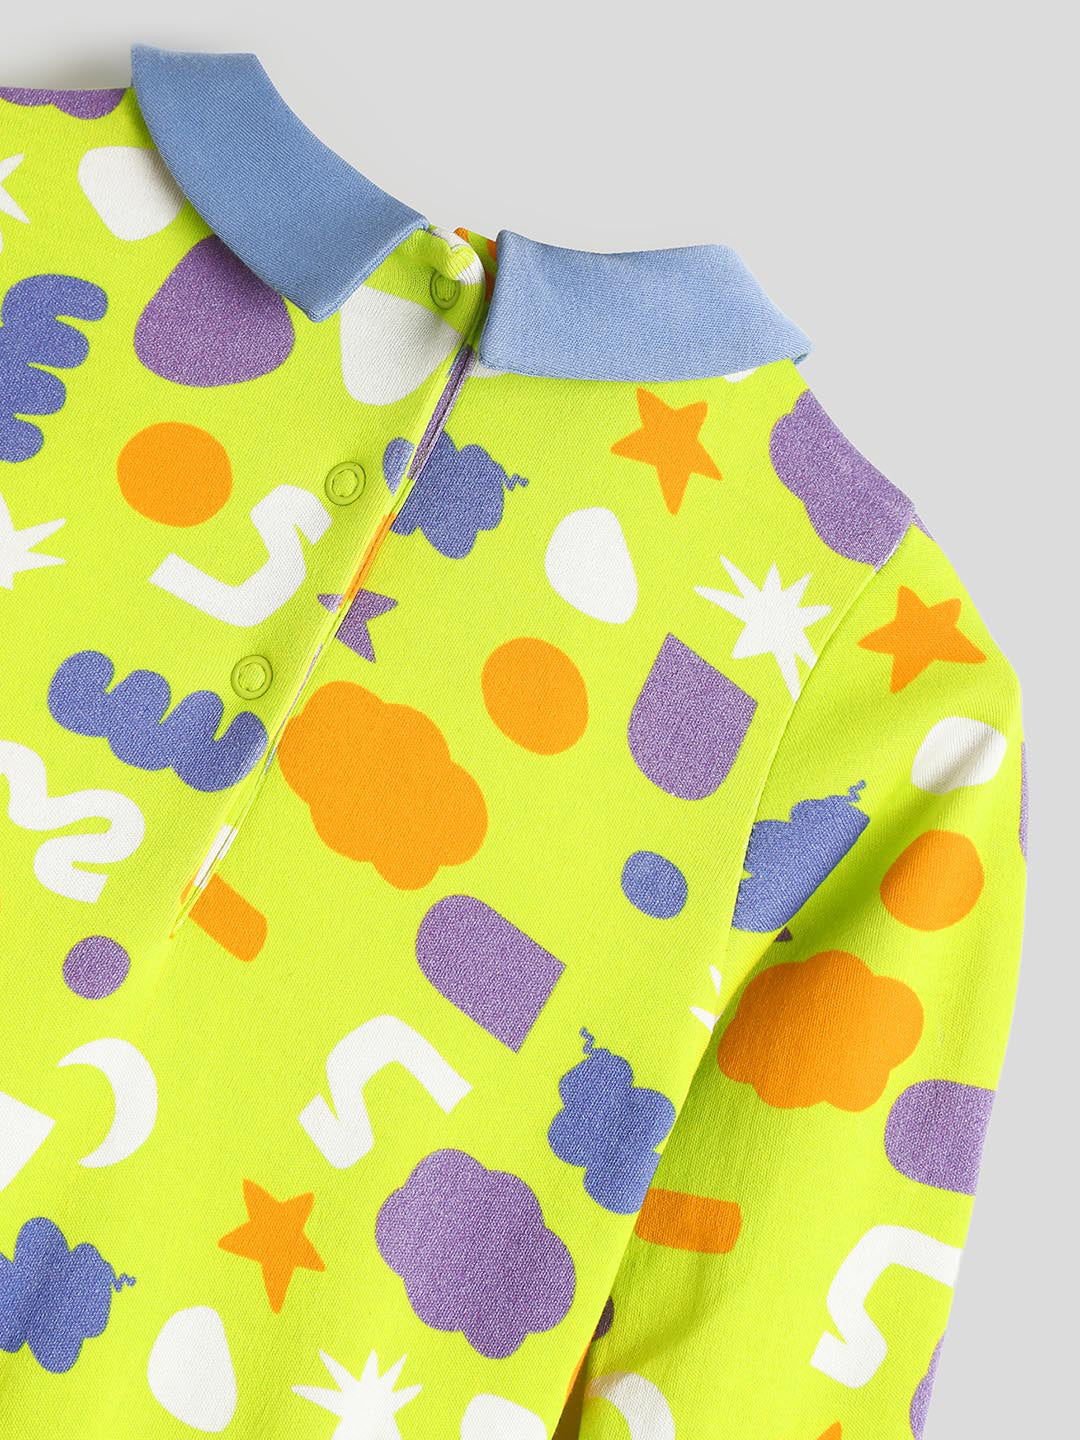 Green Crazy Shapes Sleepsuit